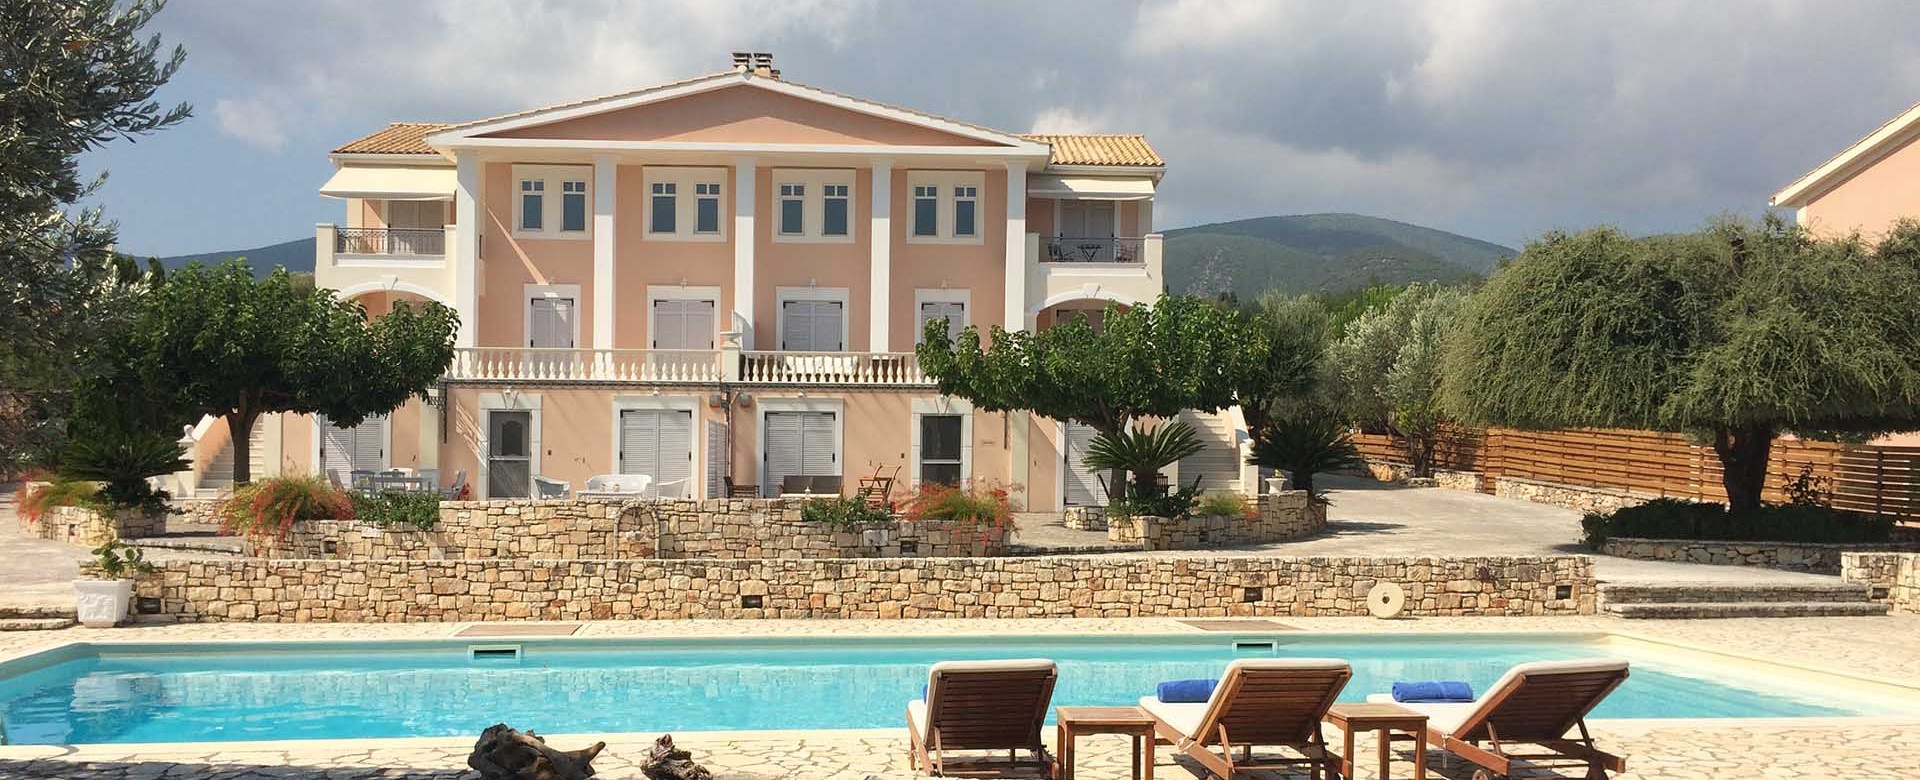 Outside view of Melissani Apartments including the pool and mountains of Kefalonia, Greek Islands